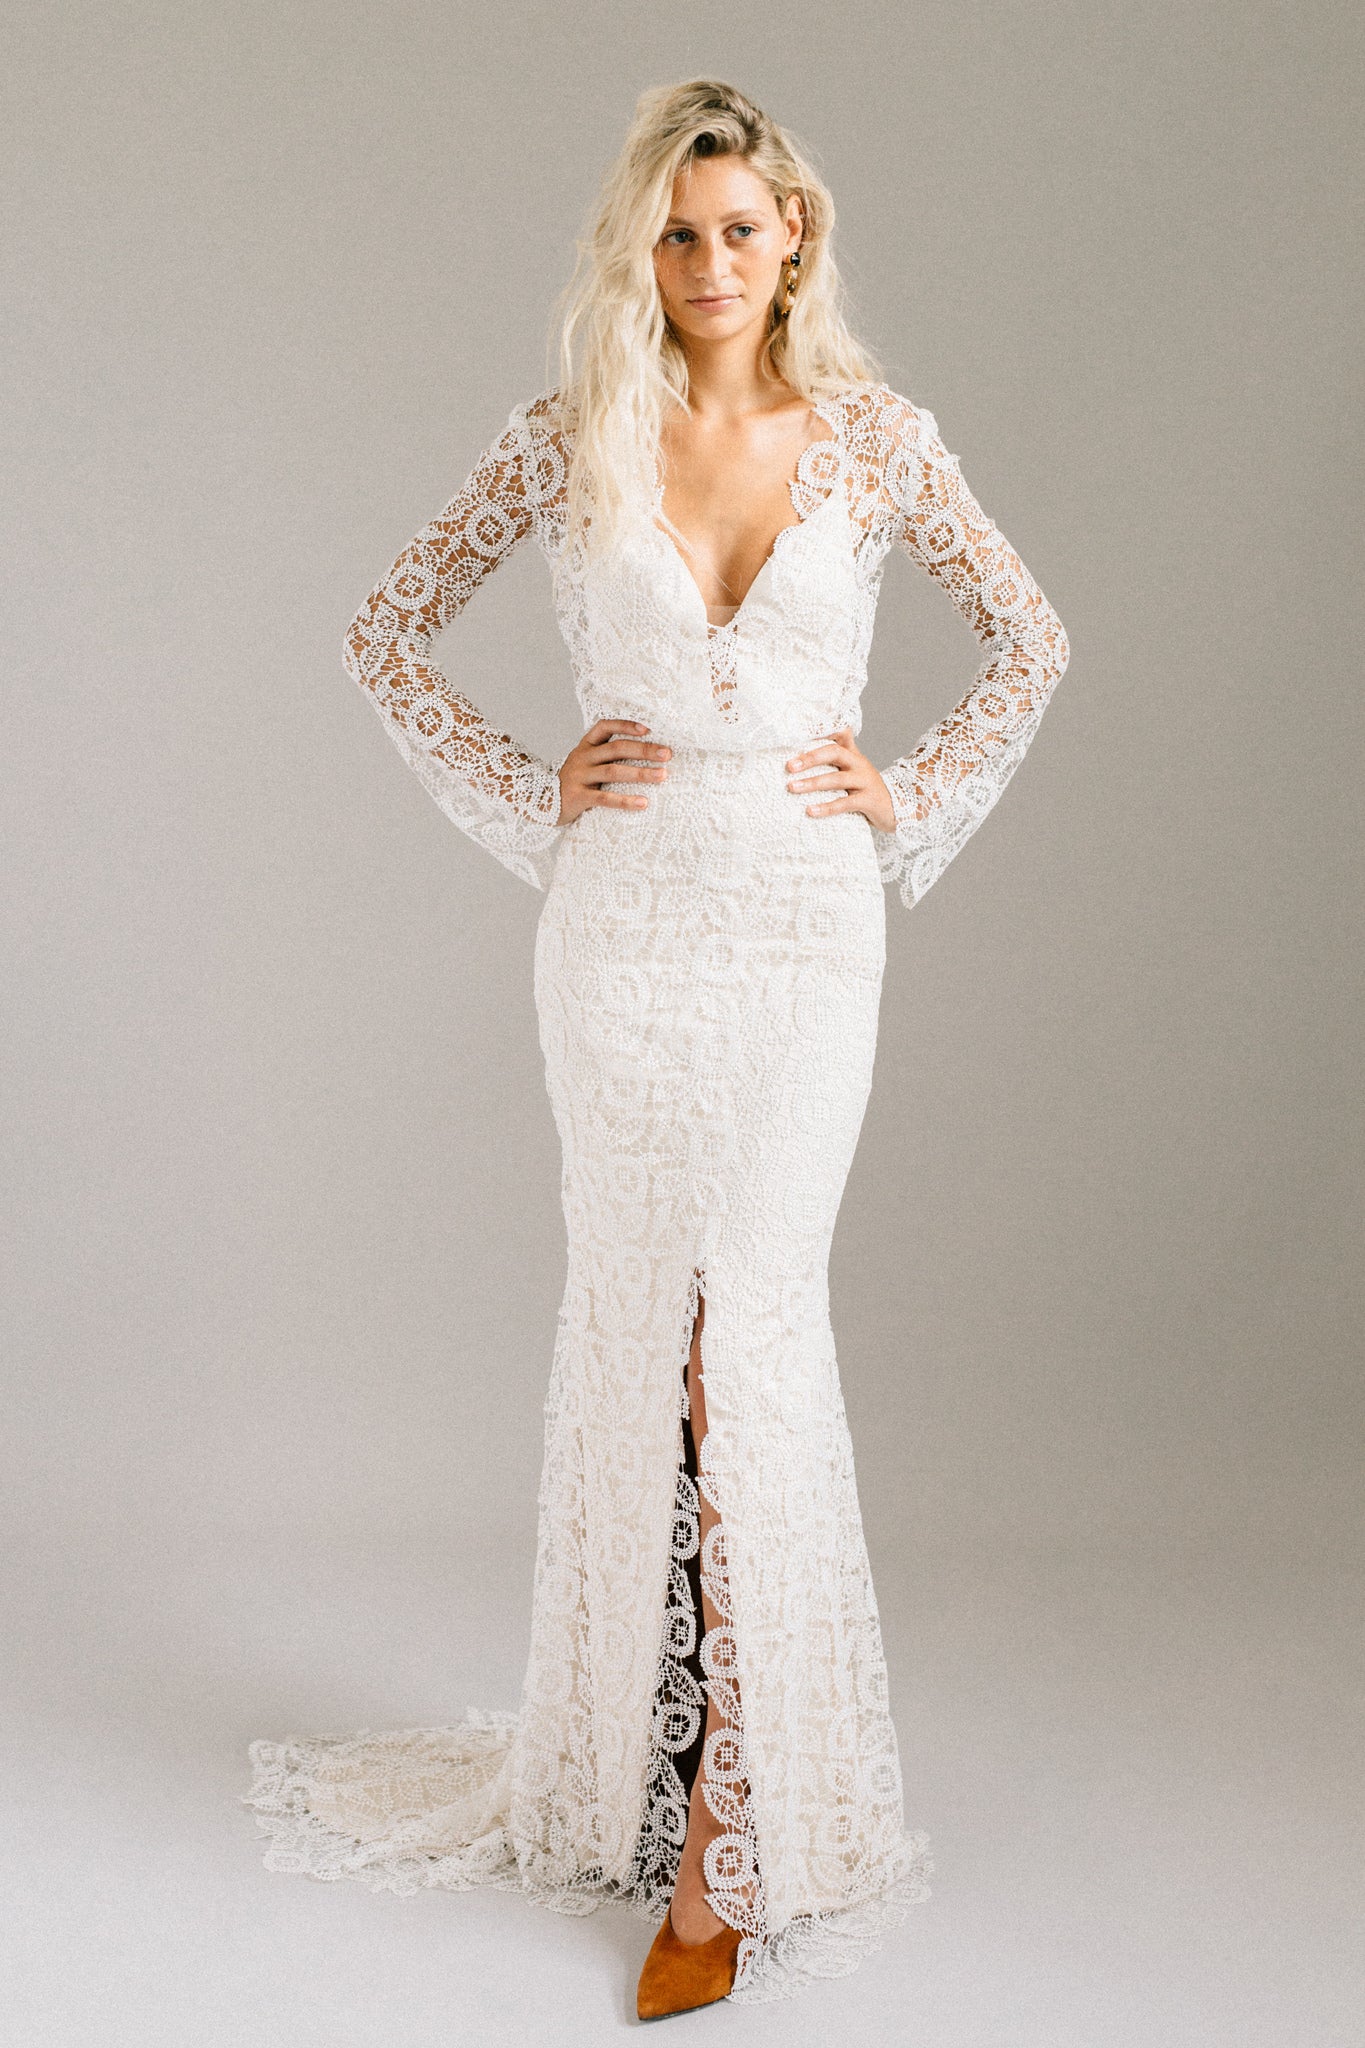 wedding dress with bell sleeves